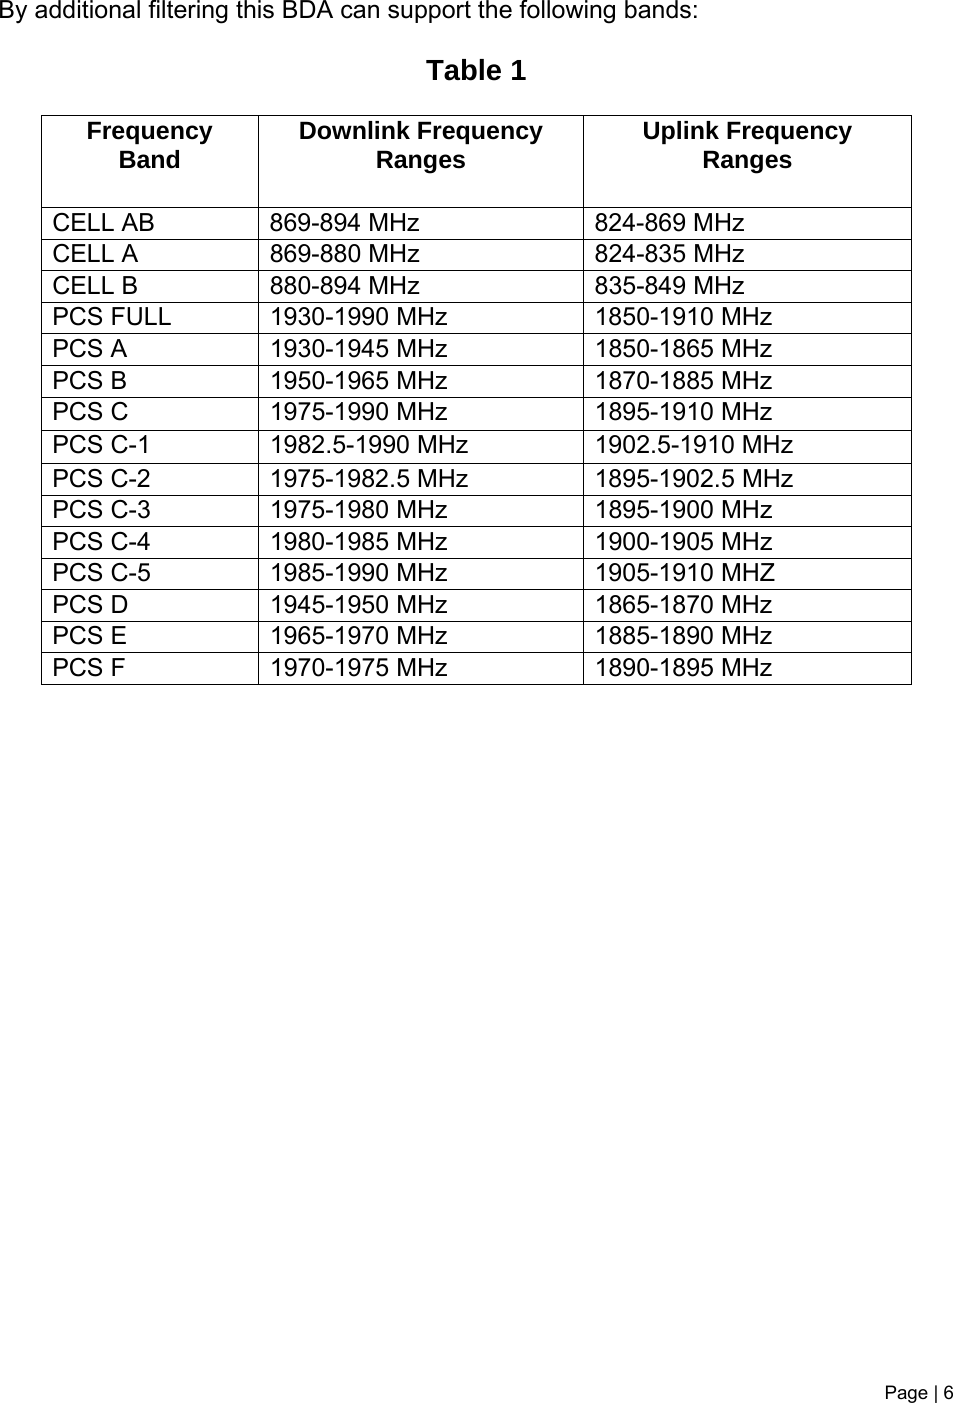 Page | 6   By additional filtering this BDA can support the following bands:  Table 1  Frequency Band  Downlink Frequency Ranges  Uplink Frequency Ranges CELL AB  869-894 MHz  824-869 MHz CELL A  869-880 MHz  824-835 MHz CELL B  880-894 MHz  835-849 MHz PCS FULL  1930-1990 MHz  1850-1910 MHz PCS A  1930-1945 MHz  1850-1865 MHz PCS B  1950-1965 MHz  1870-1885 MHz PCS C  1975-1990 MHz  1895-1910 MHz PCS C-1  1982.5-1990 MHz  1902.5-1910 MHz PCS C-2  1975-1982.5 MHz  1895-1902.5 MHz PCS C-3  1975-1980 MHz  1895-1900 MHz PCS C-4  1980-1985 MHz  1900-1905 MHz PCS C-5  1985-1990 MHz  1905-1910 MHZ PCS D  1945-1950 MHz  1865-1870 MHz PCS E  1965-1970 MHz  1885-1890 MHz PCS F  1970-1975 MHz  1890-1895 MHz    